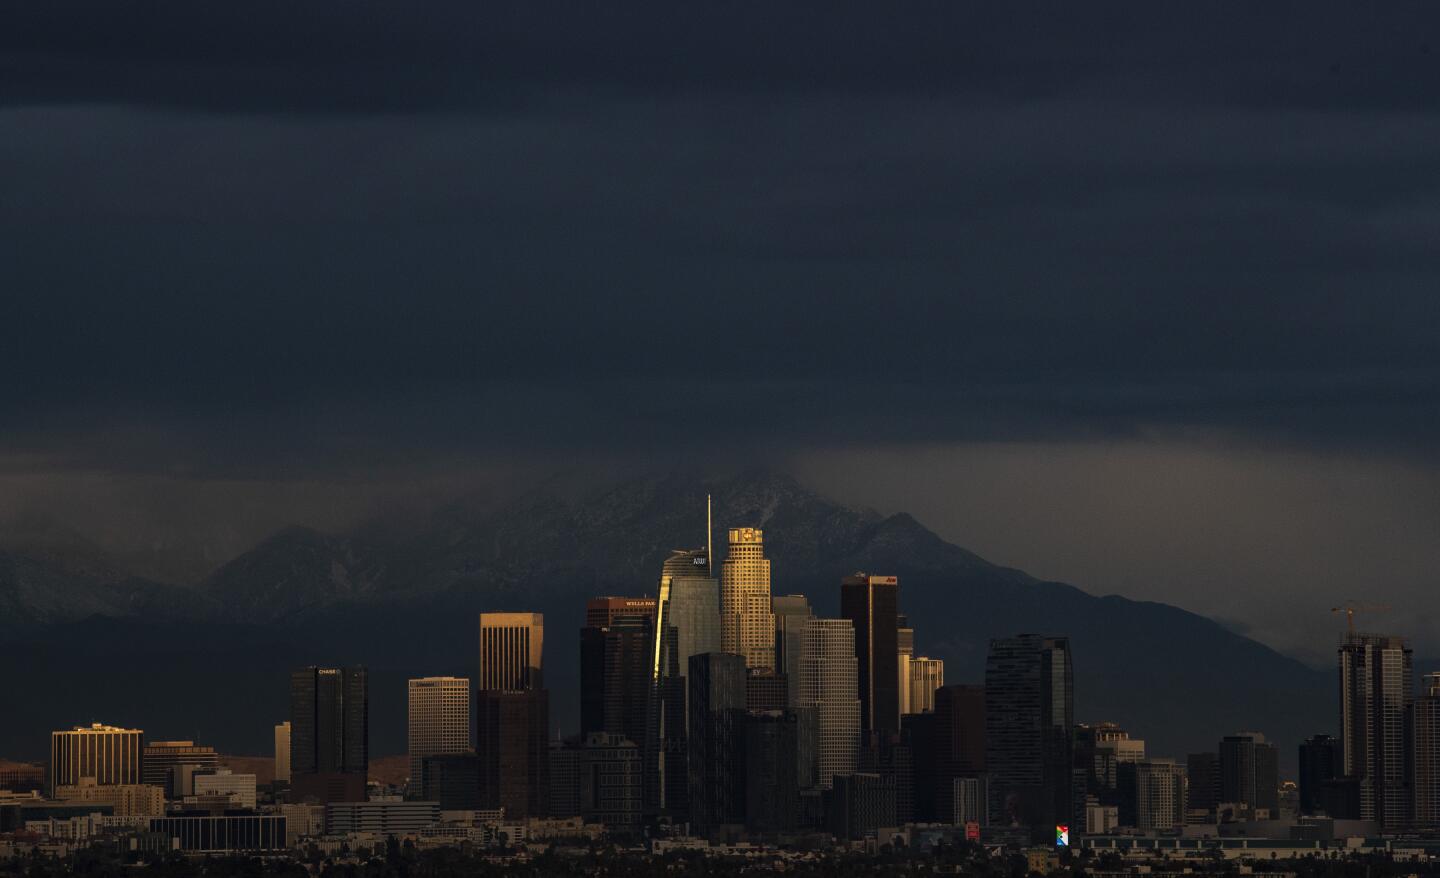 The setting sun peeks through a cloud layer, illuminating downtown skyscrapers as the season’s first storm moves through the basin and brings rain in Los Angeles.